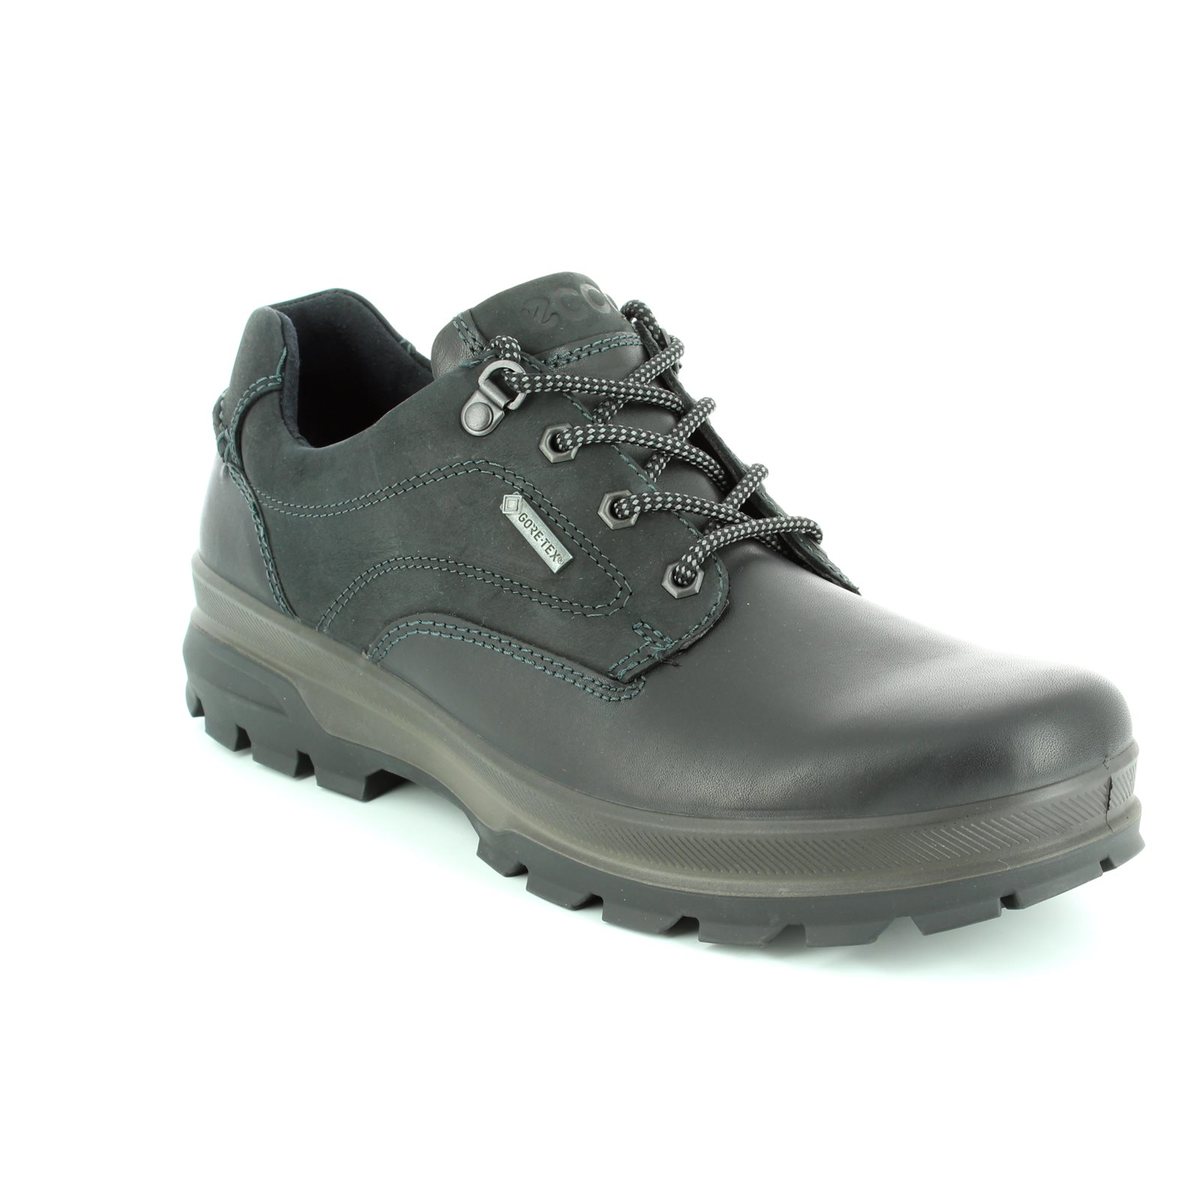 gore tex casual shoes